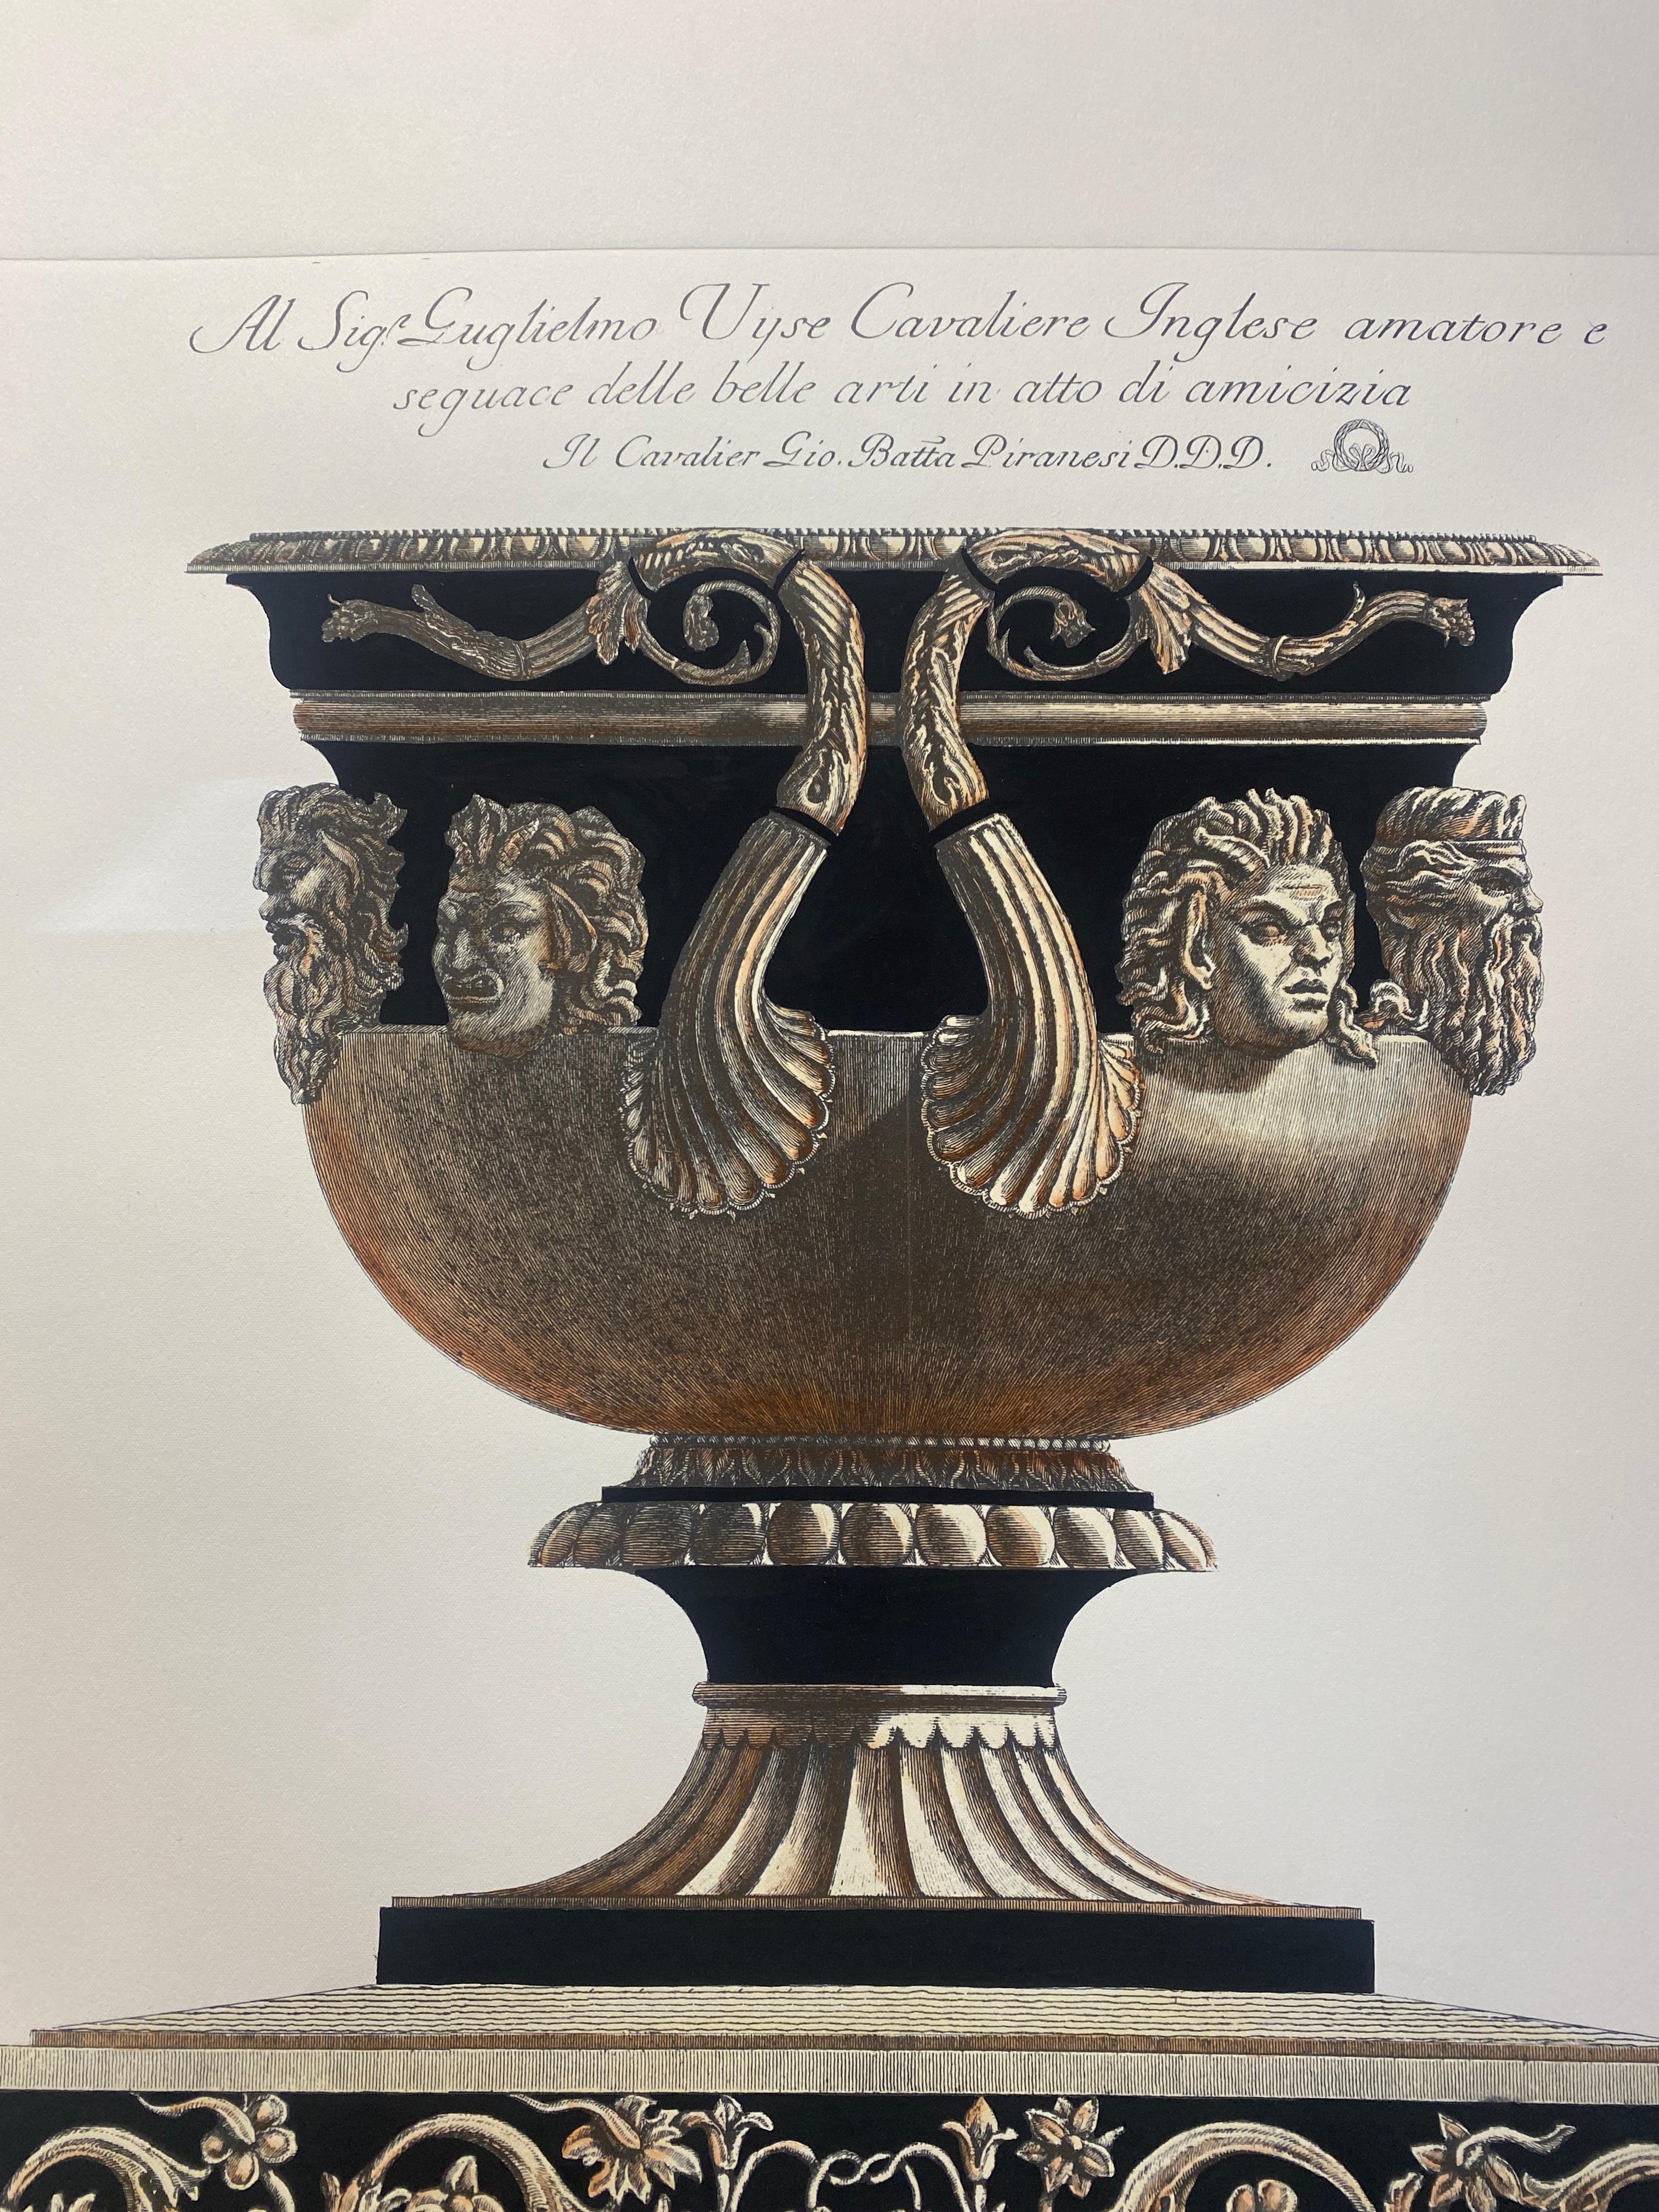 Extra large Roman marble vase on a porphyry pedestal printed on a hand press on 100% cotton engraving paper.
Completely handpainted with a cream wash, umber highlights, and matte black details.
Light brown mat with black hand embellishments.
The